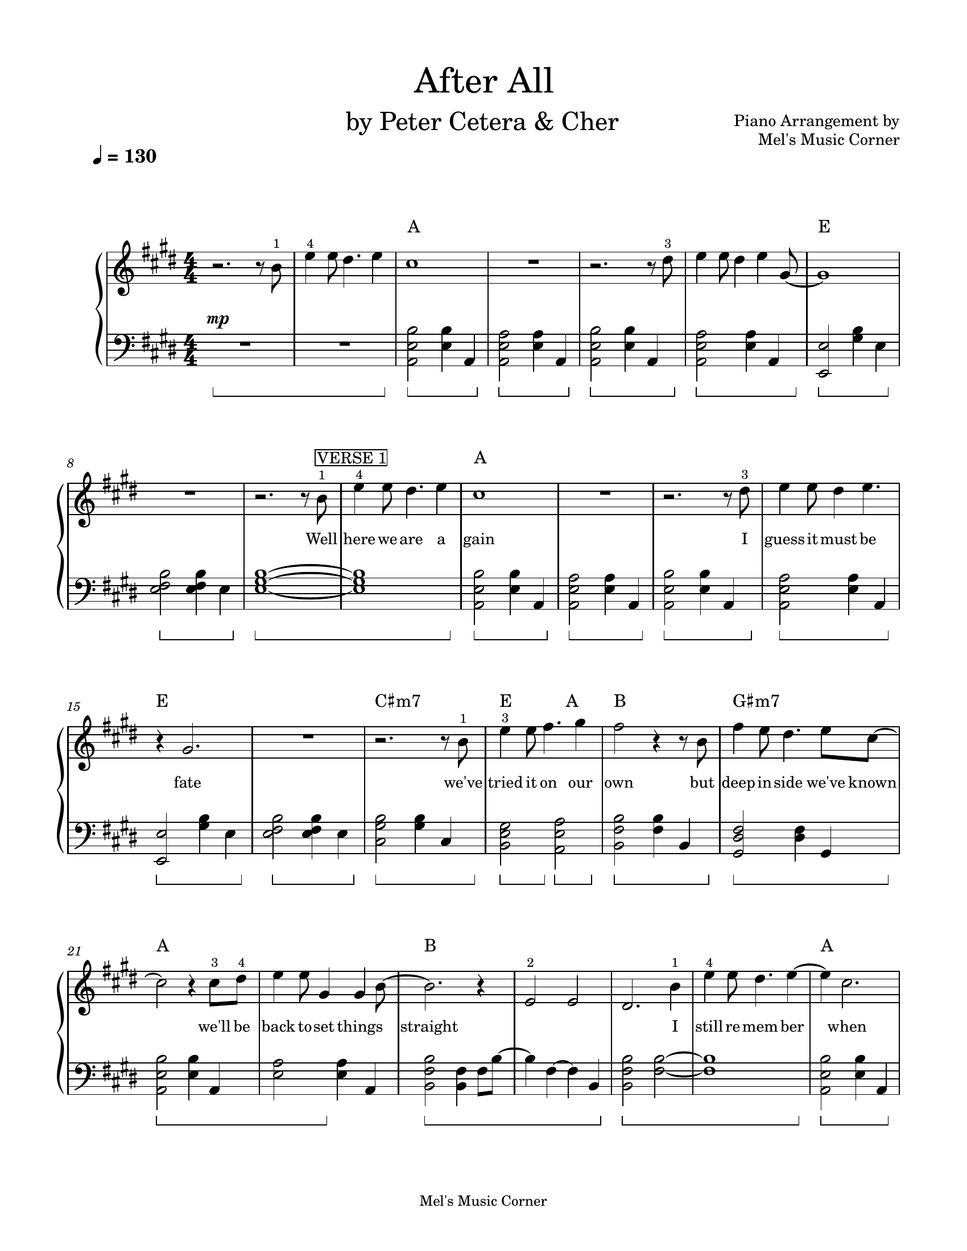 Peter Cetera & Cher - After All (piano sheet music) by Mel's Music Corner